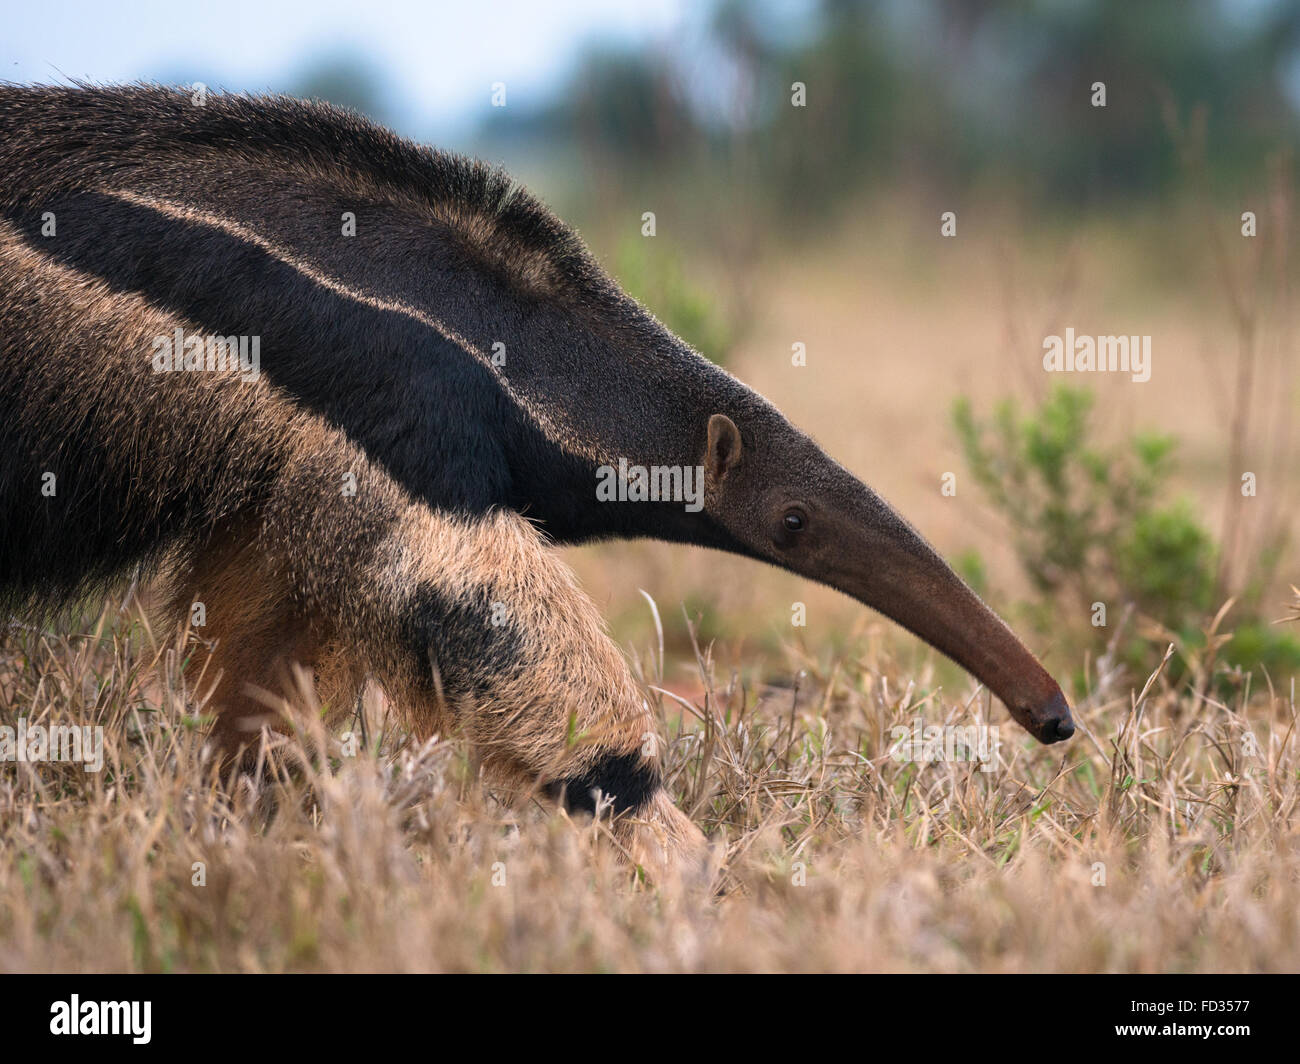 A Giant Anteater foraging on a grassland Stock Photo